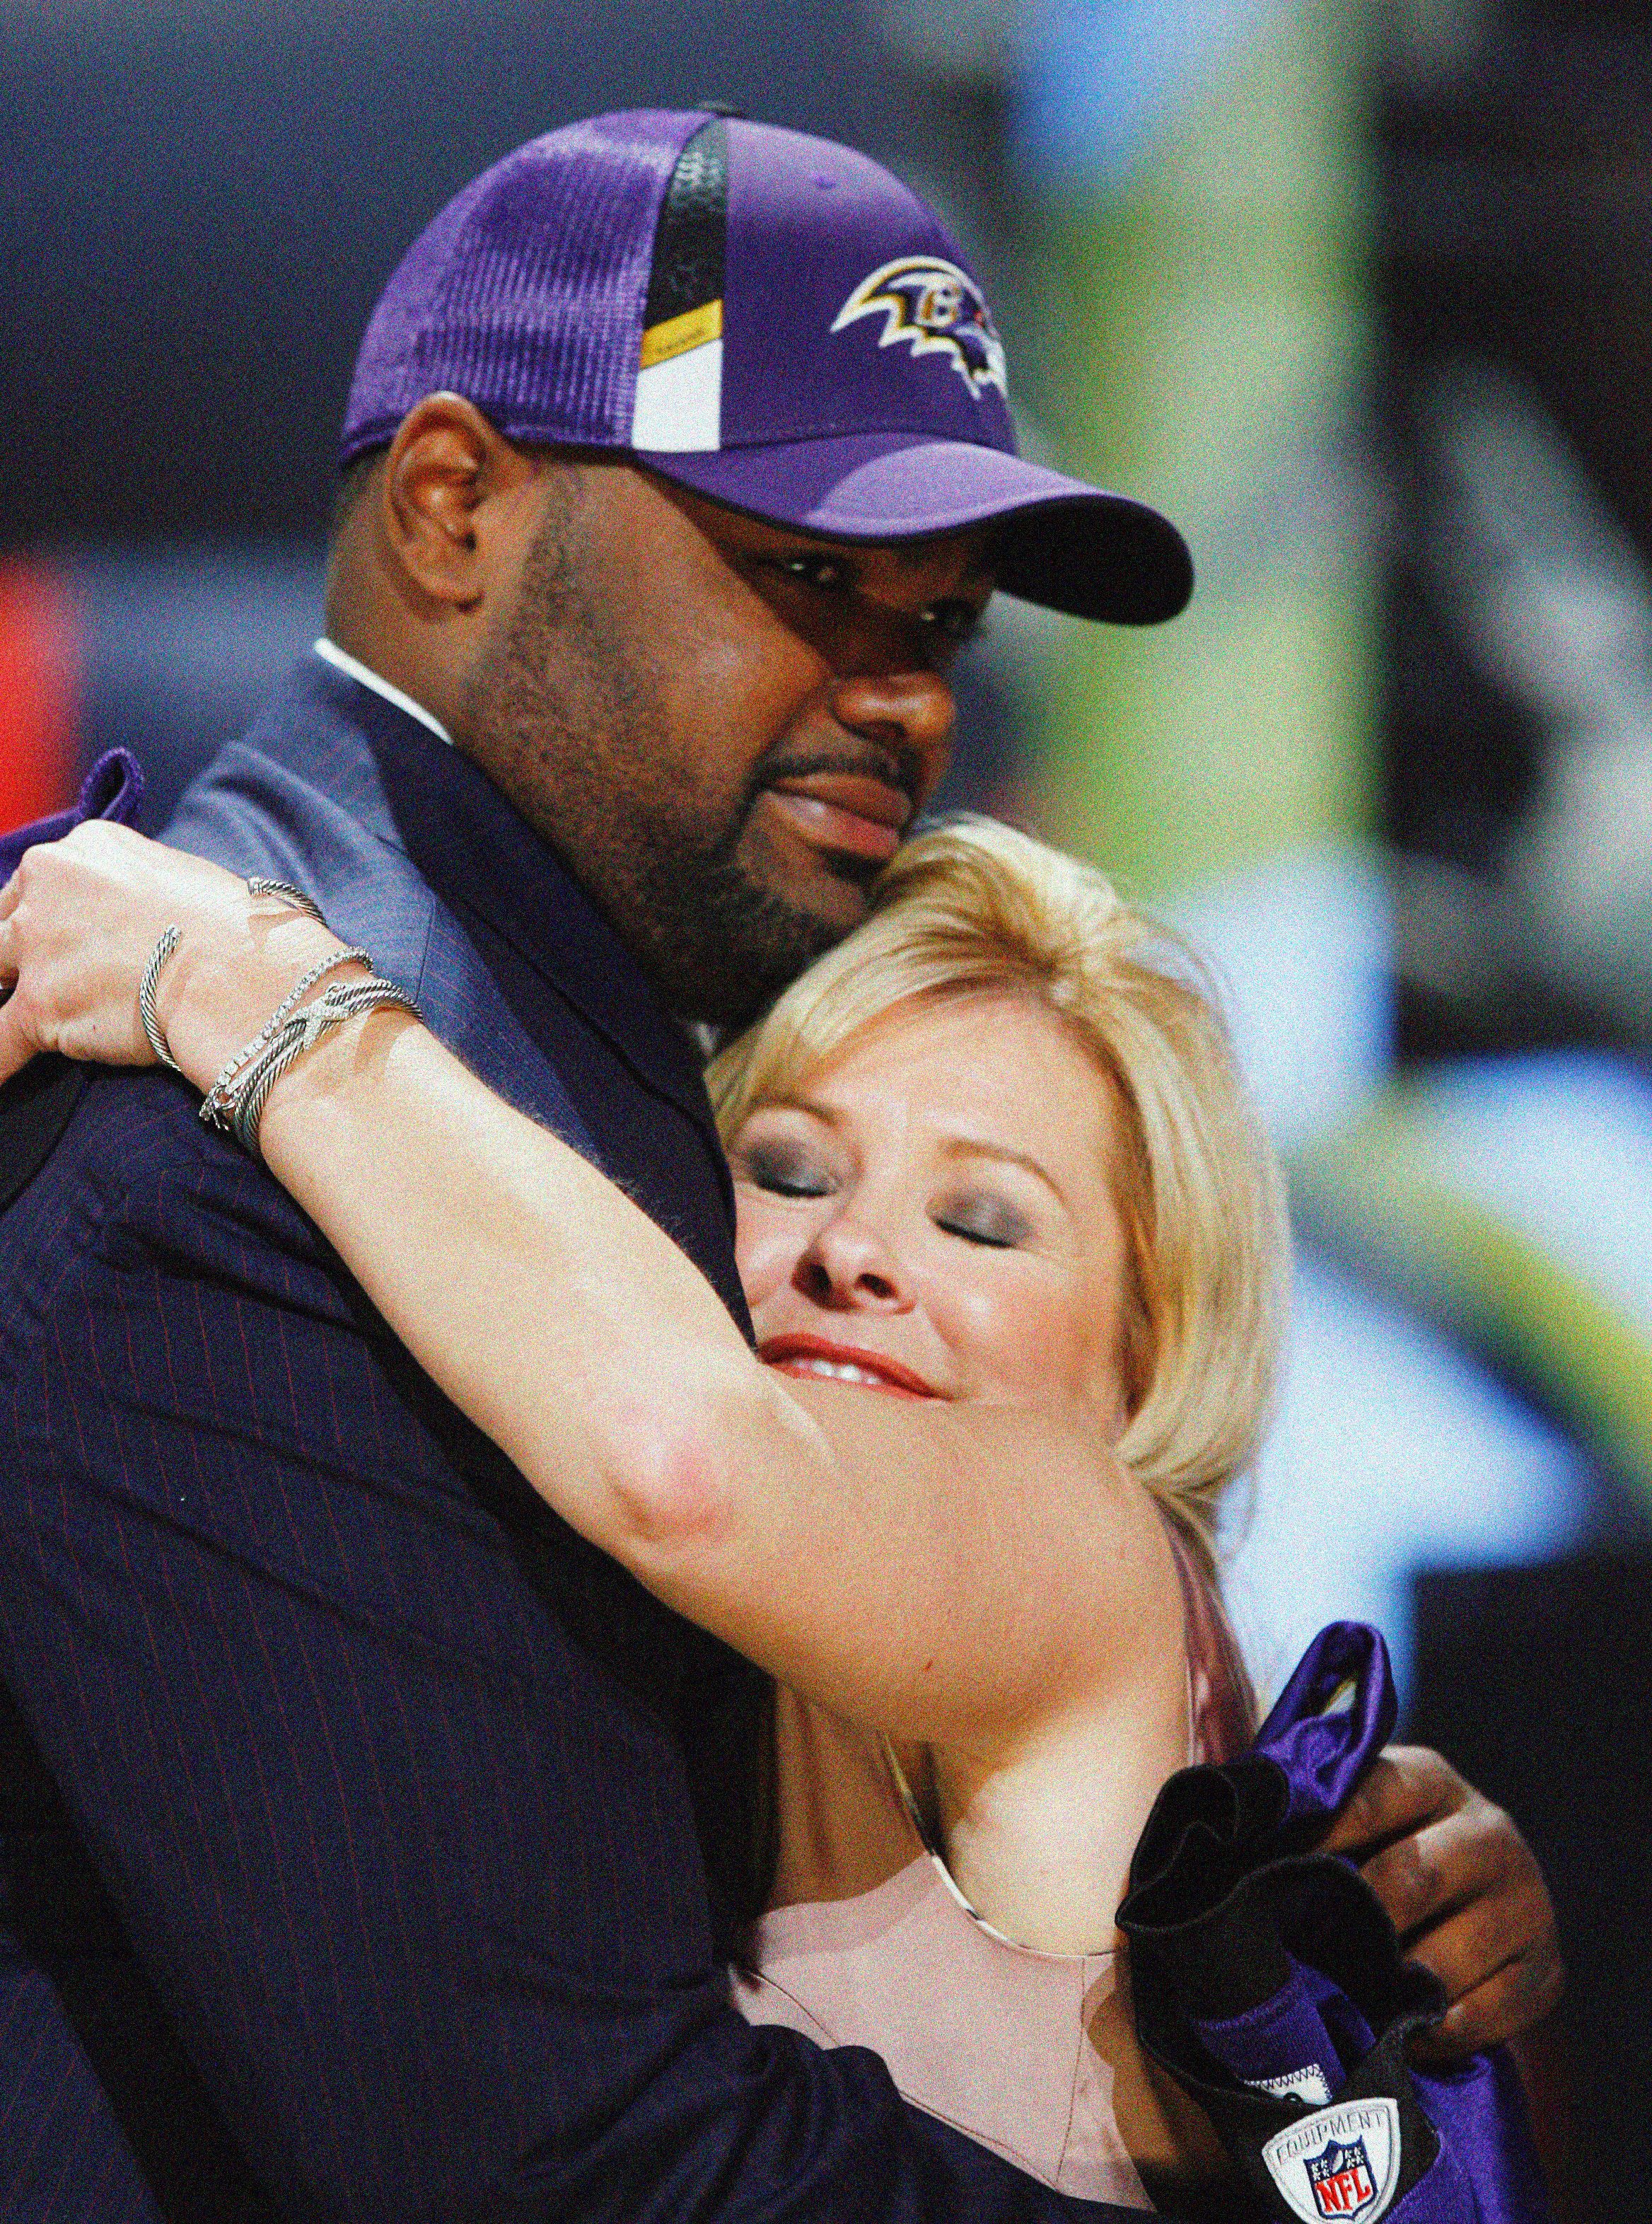 Michael Oher's Quotes About the Tuohy Family Before Lawsuit